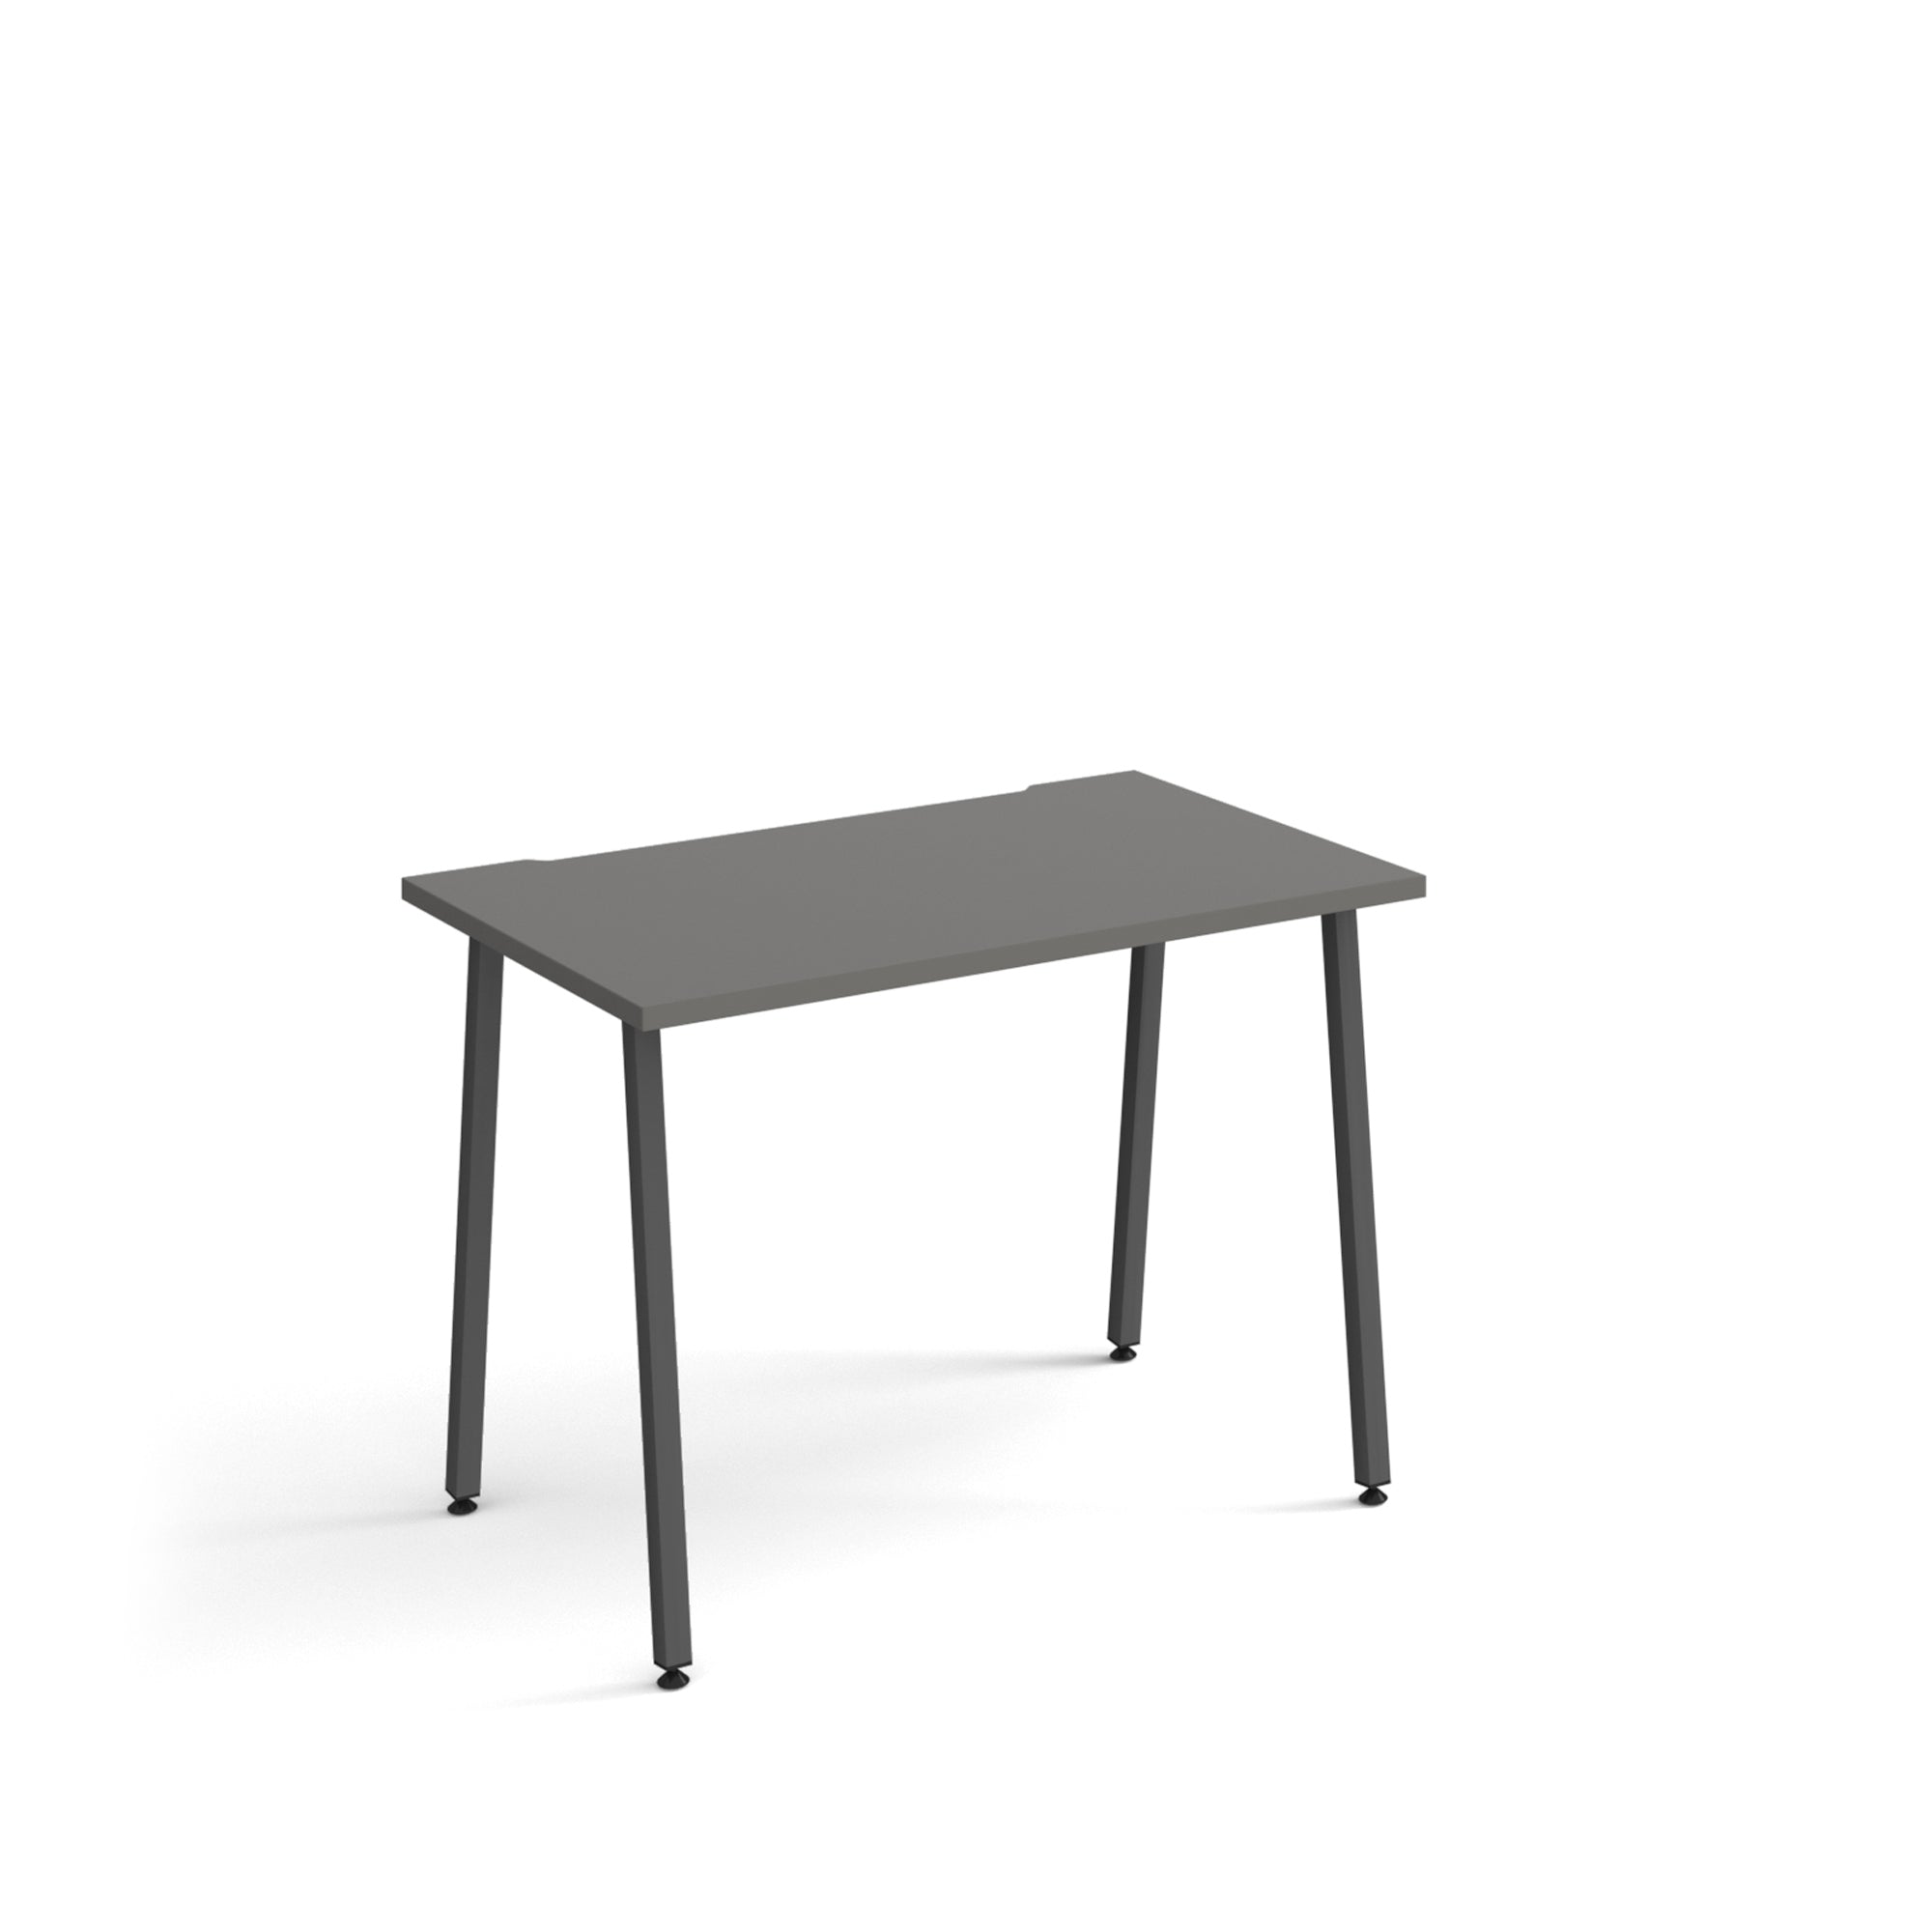 Sparta straight desk with A-frame legs - Office Products Online